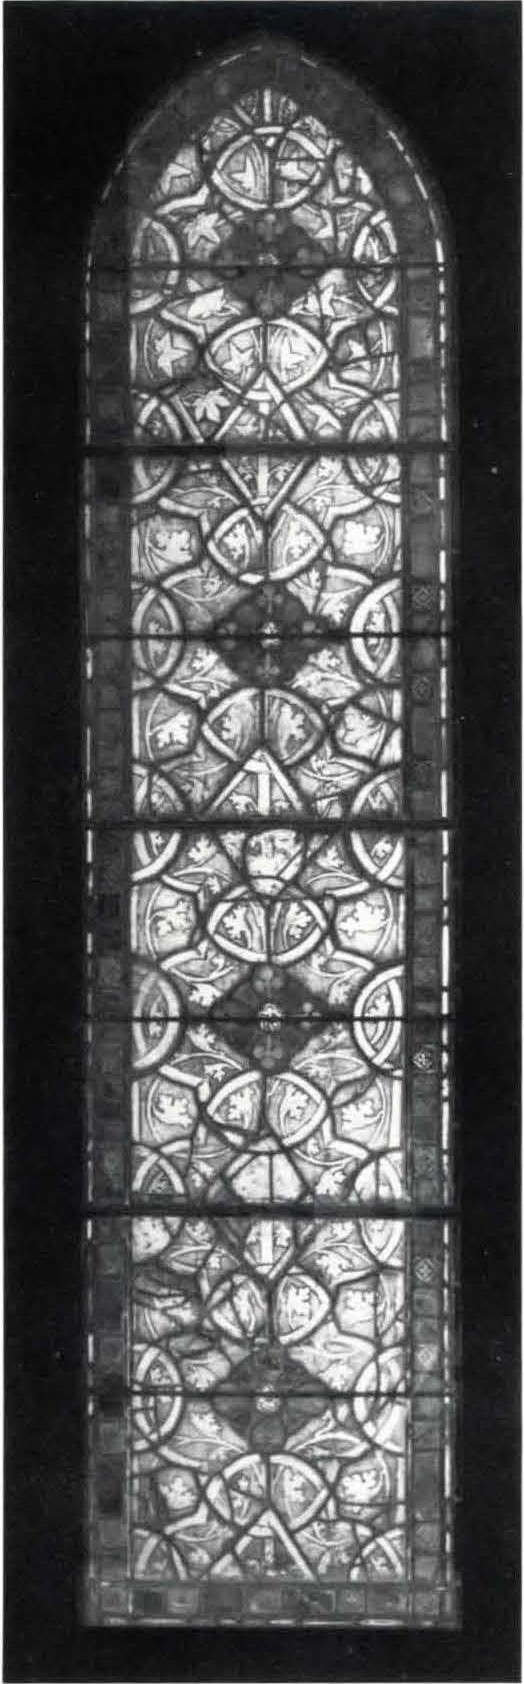 GRISAILLE LANCET OF FOUR PANELS WITH IVY AND GERANIUM LEAF PATTERNS